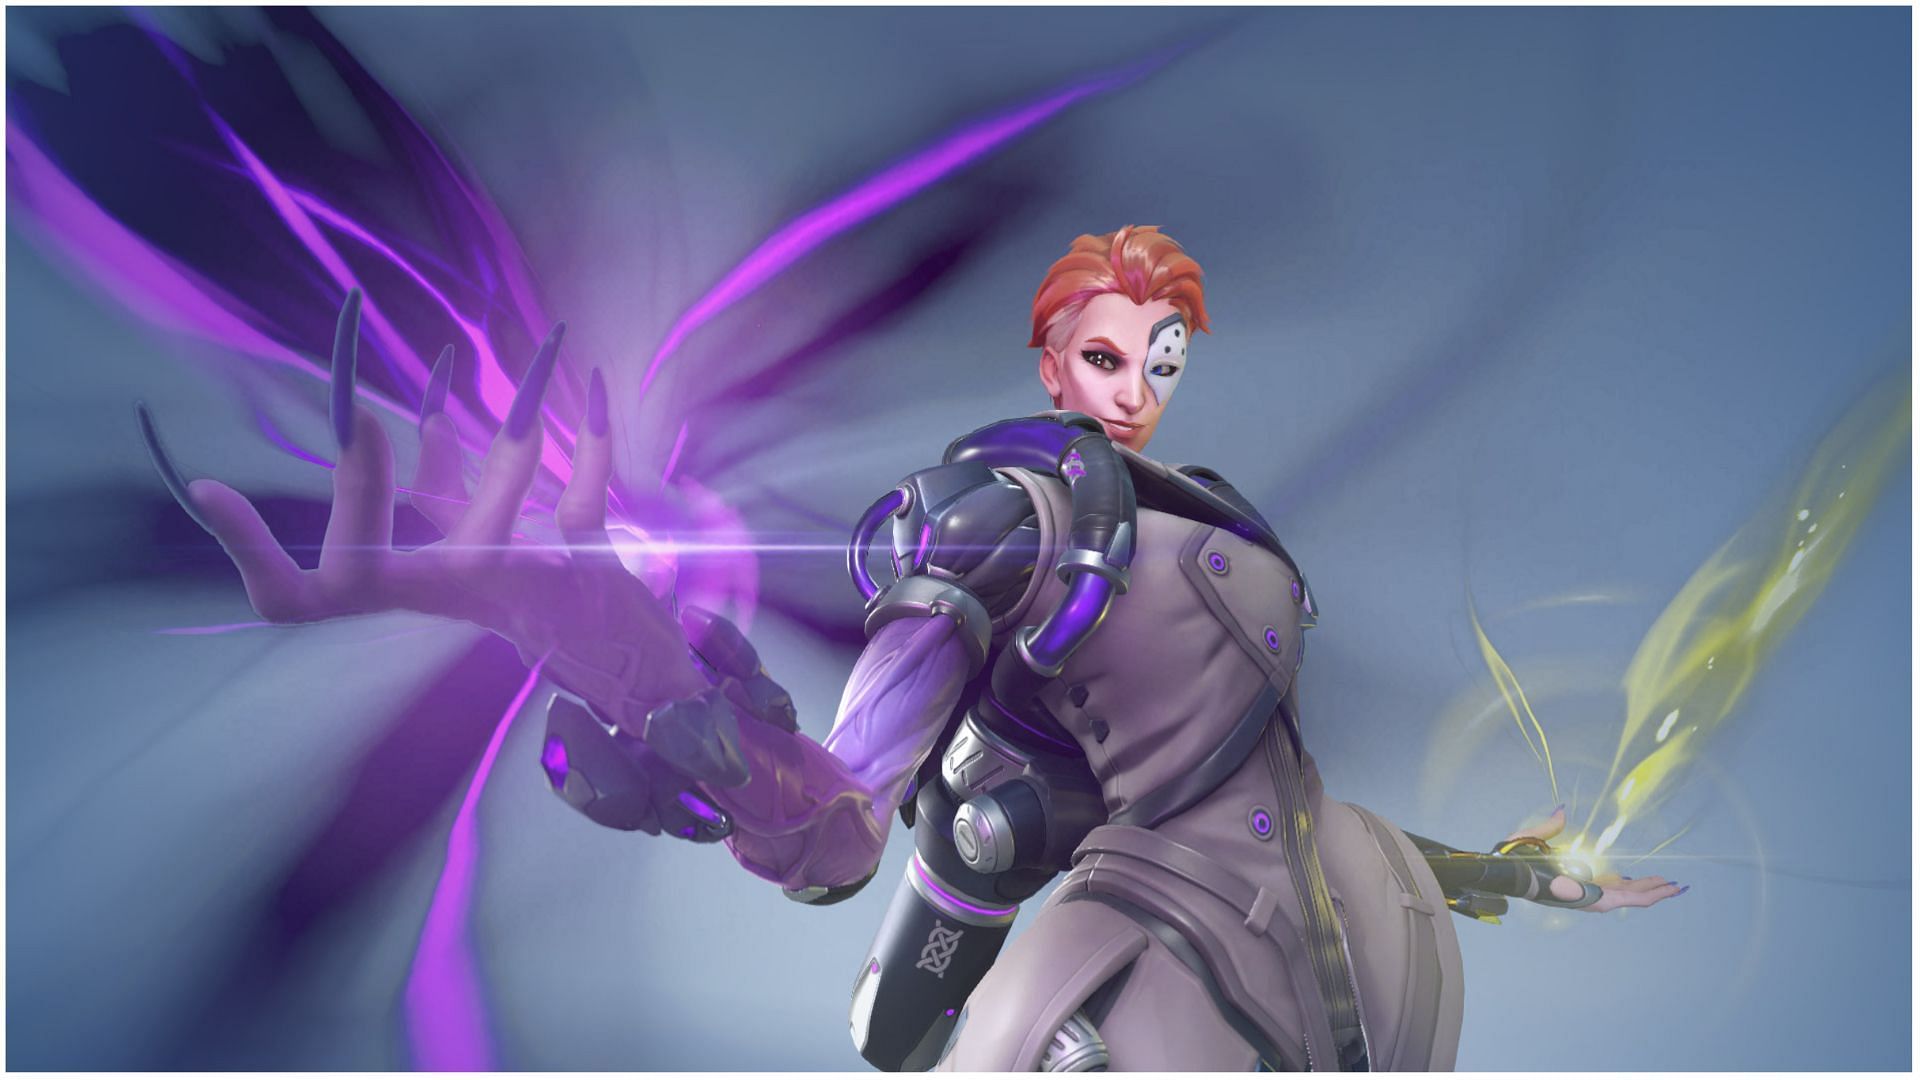 Moira as seen in Overwatch 2 (Image via Activision Blizzard)